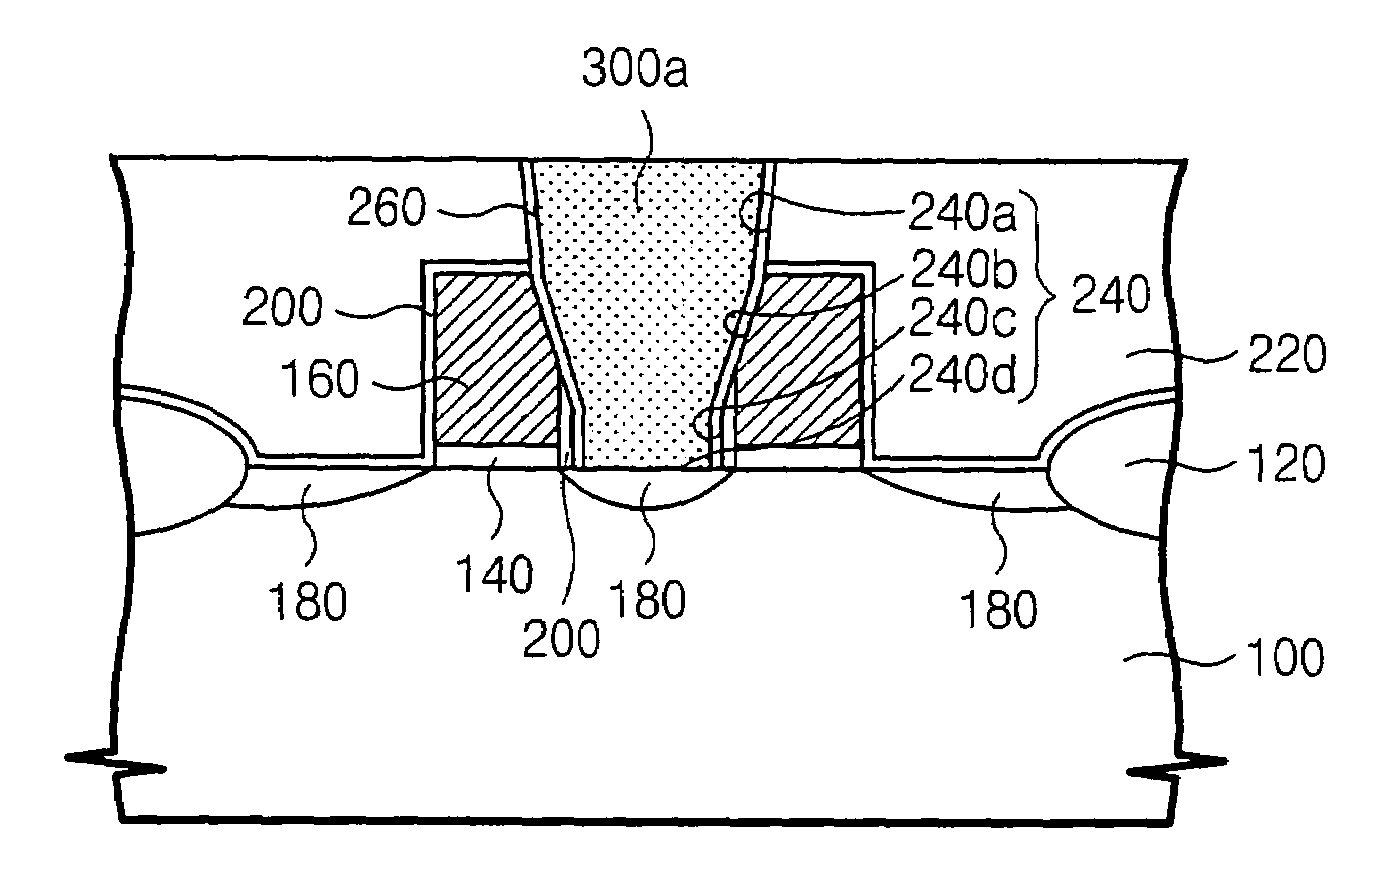 Self-aligned semiconductor contact structures and methods for fabricating the same